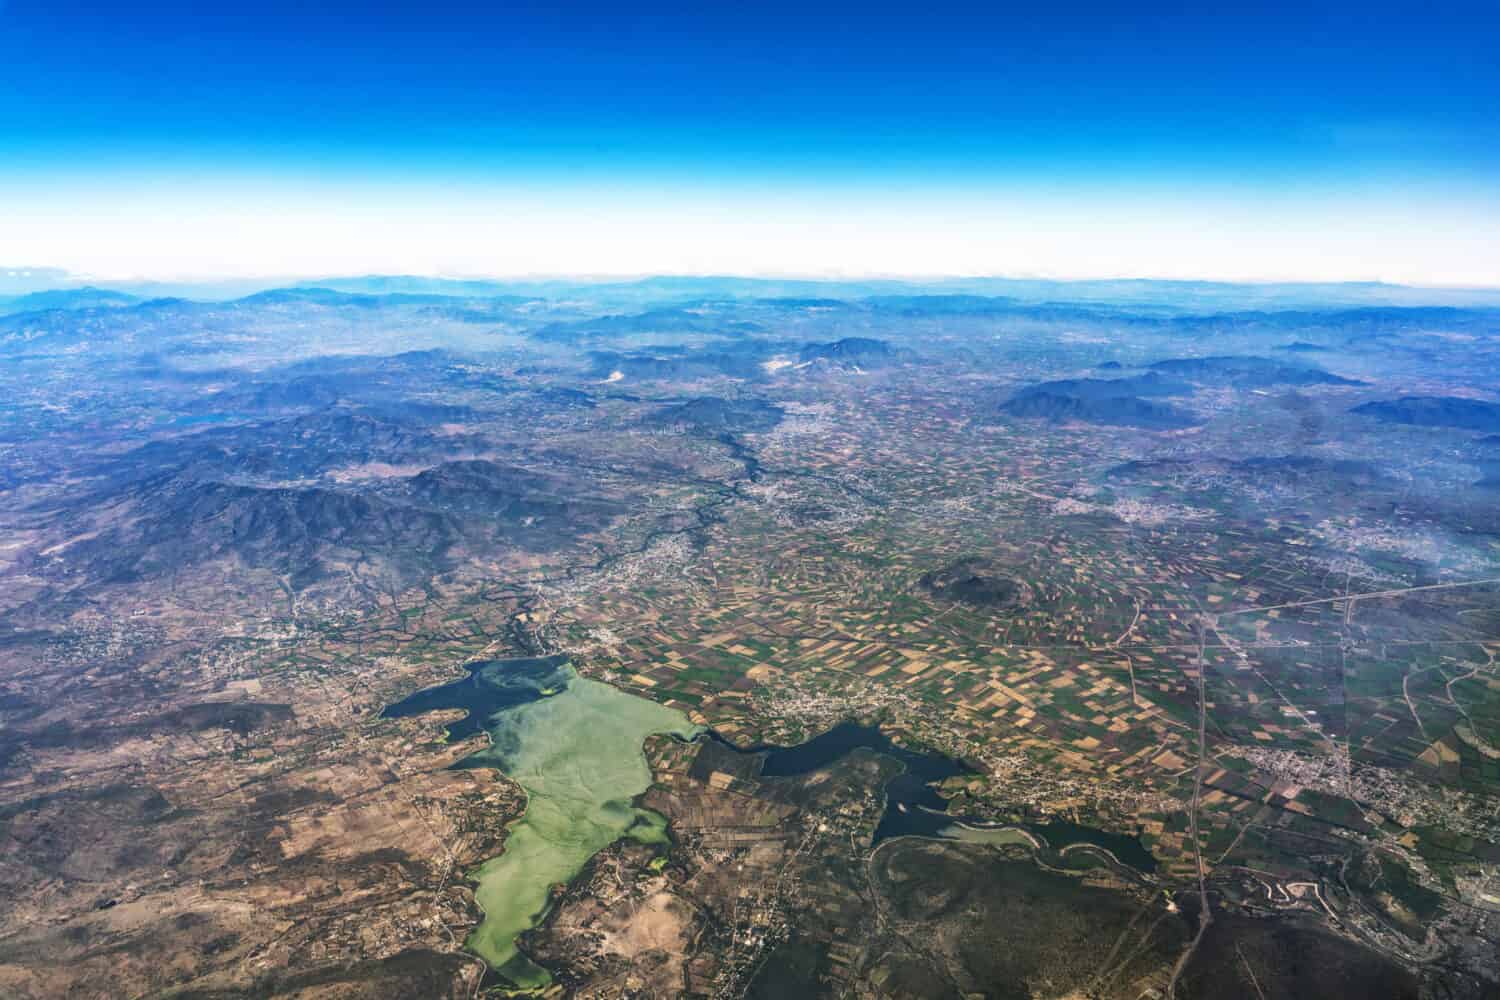 lake texcoco farmed fields and mountains near mexico city aerial view landscape from airplane leon city guadalajara